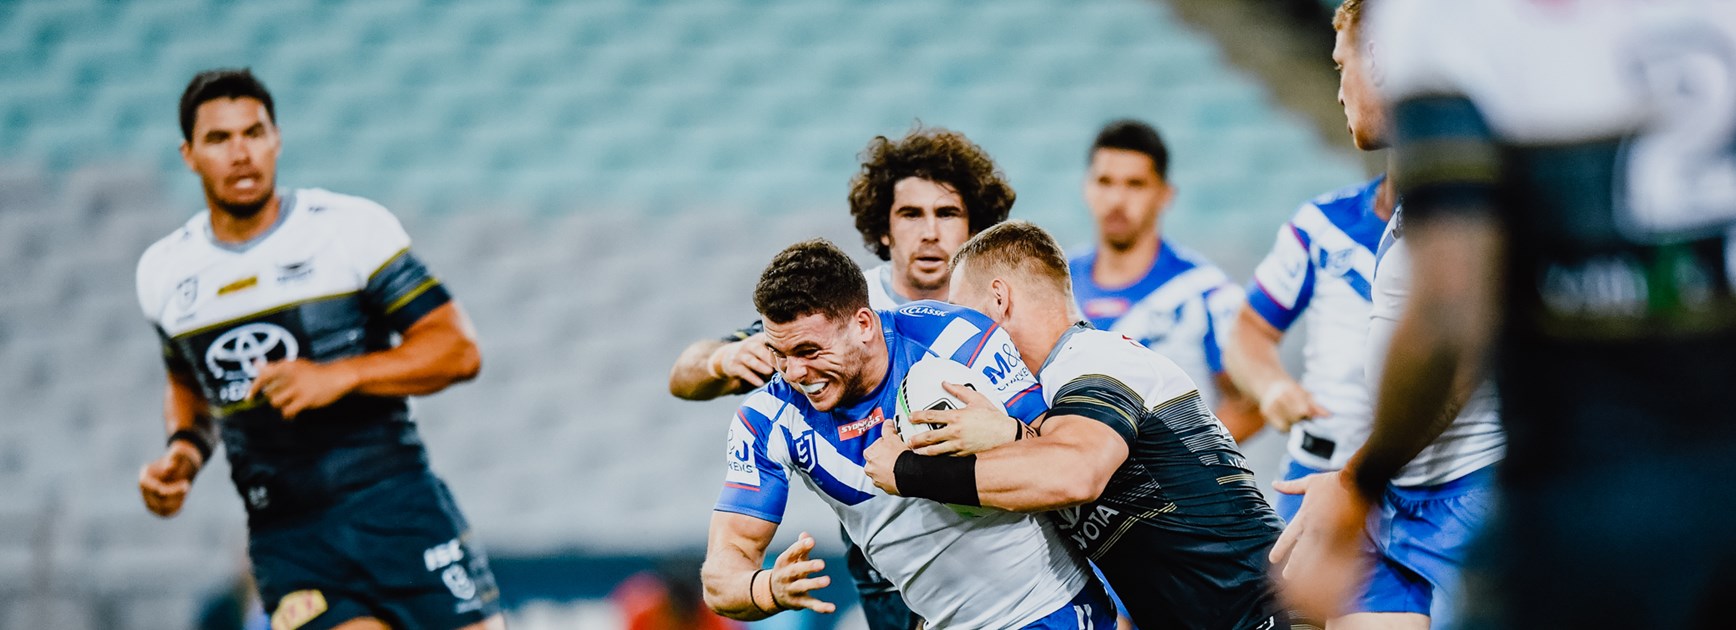 Dogs suffer defeat to Cowboys